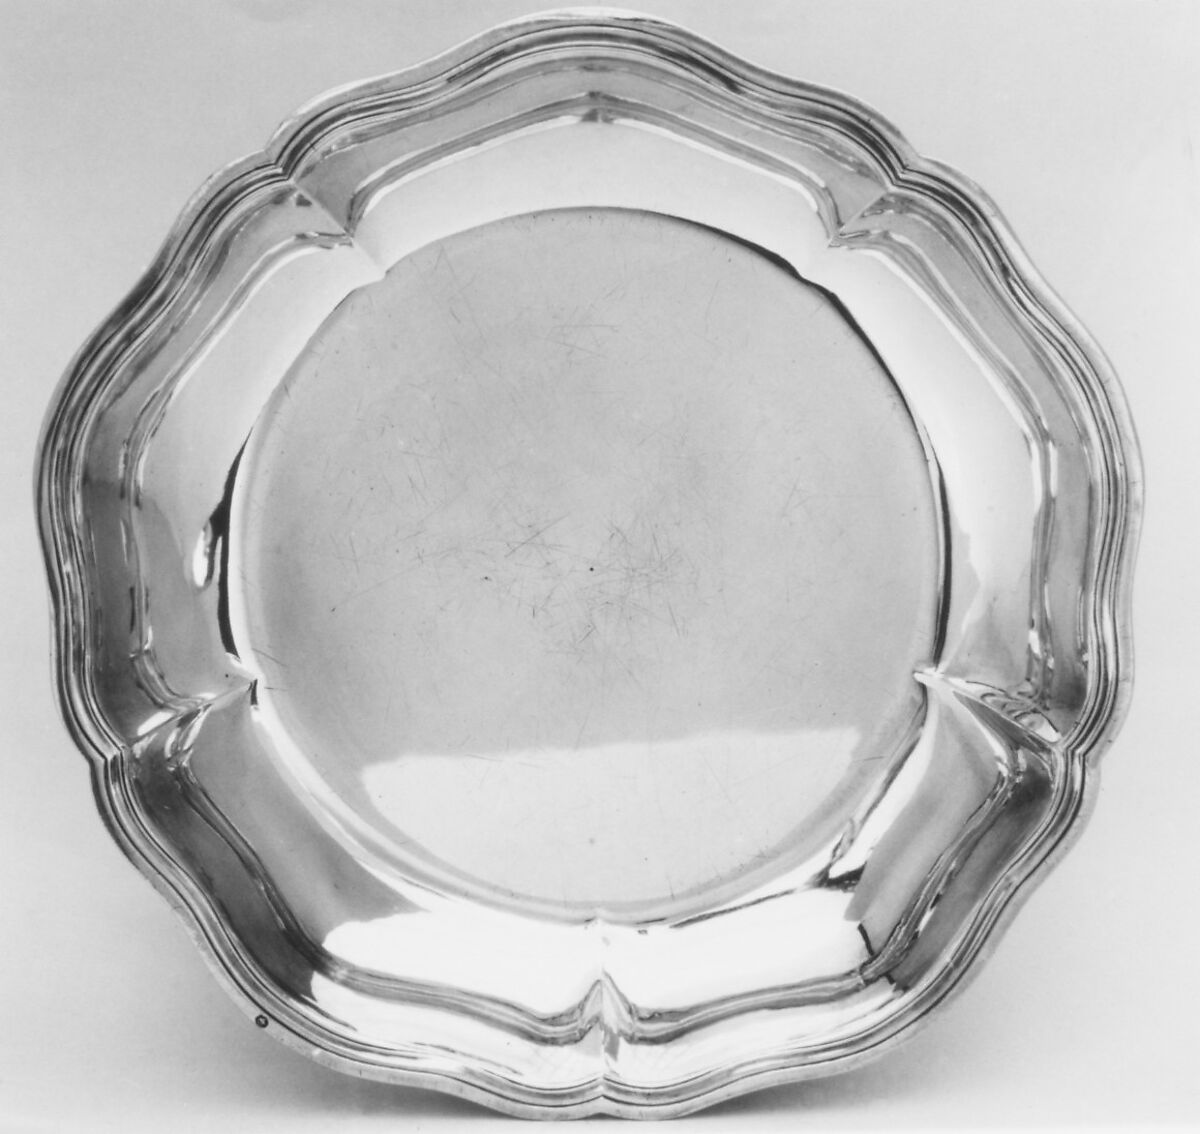 Dish (one of a pair), Jean-Louis Morel (born 1721, master 1748, recorded 1789), Silver, French, Paris 